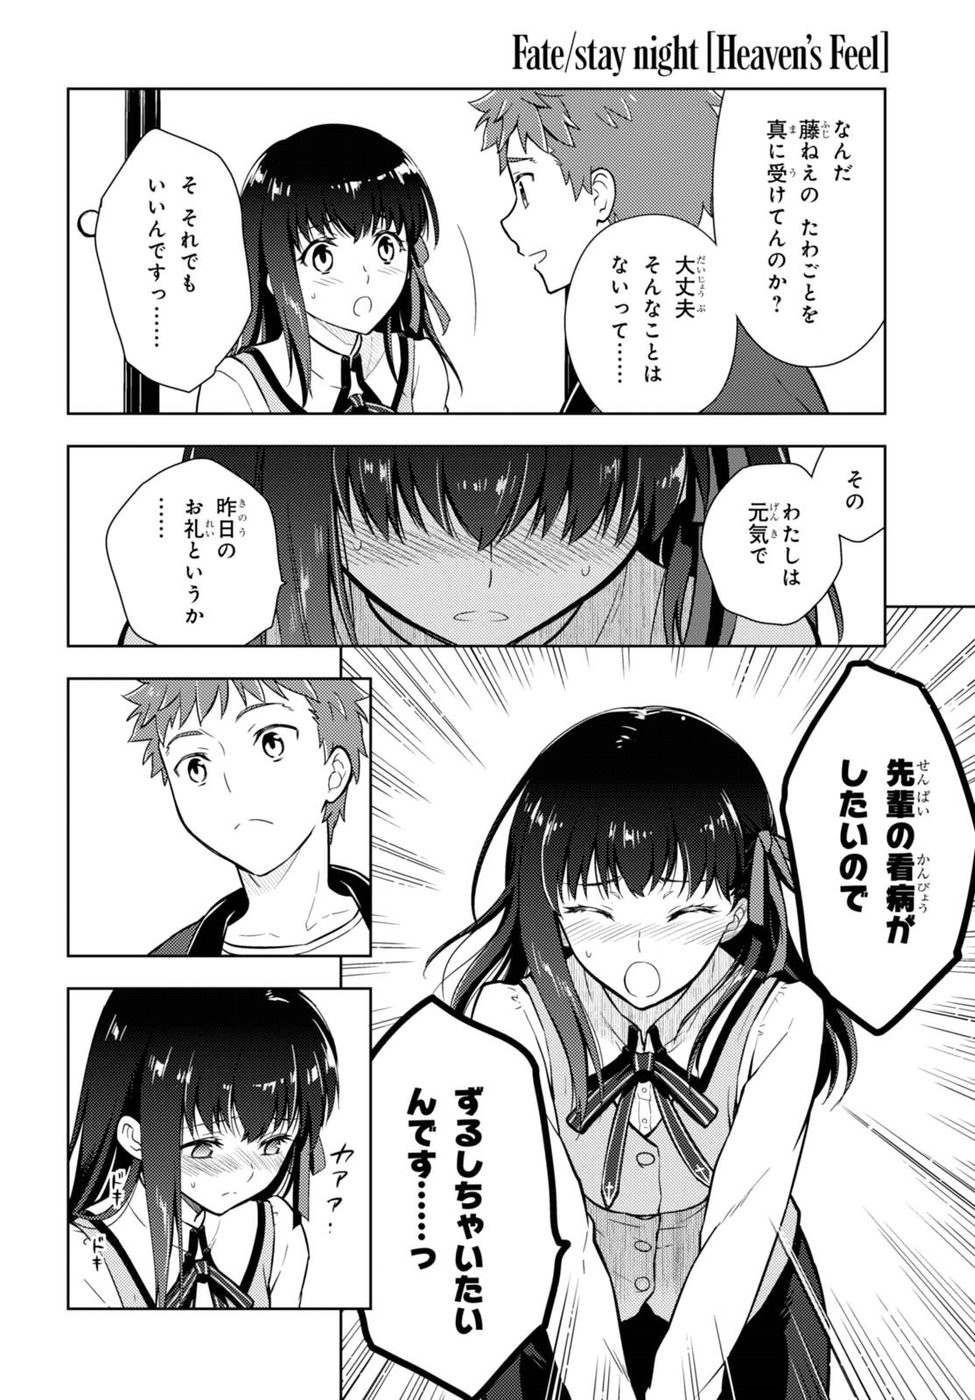 Fate/Stay night Heaven's Feel - Chapter 32 - Page 10